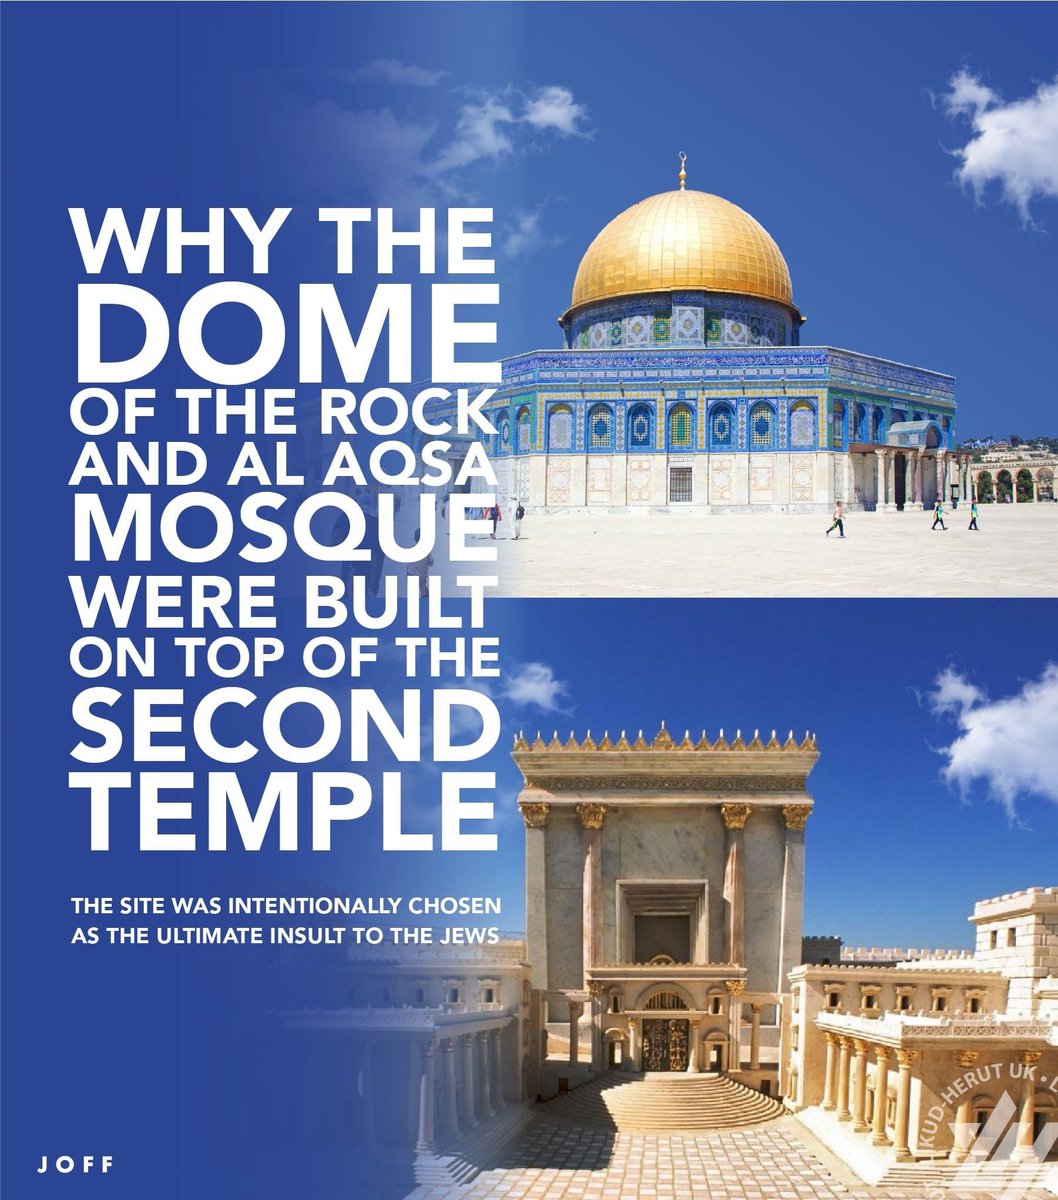 It is no happy accident that the Dome of the Rock and Al Aqsa Mosque were built where they were. The year was 688AD. Islam was in its infancy, having been founded just 66 years earlier.